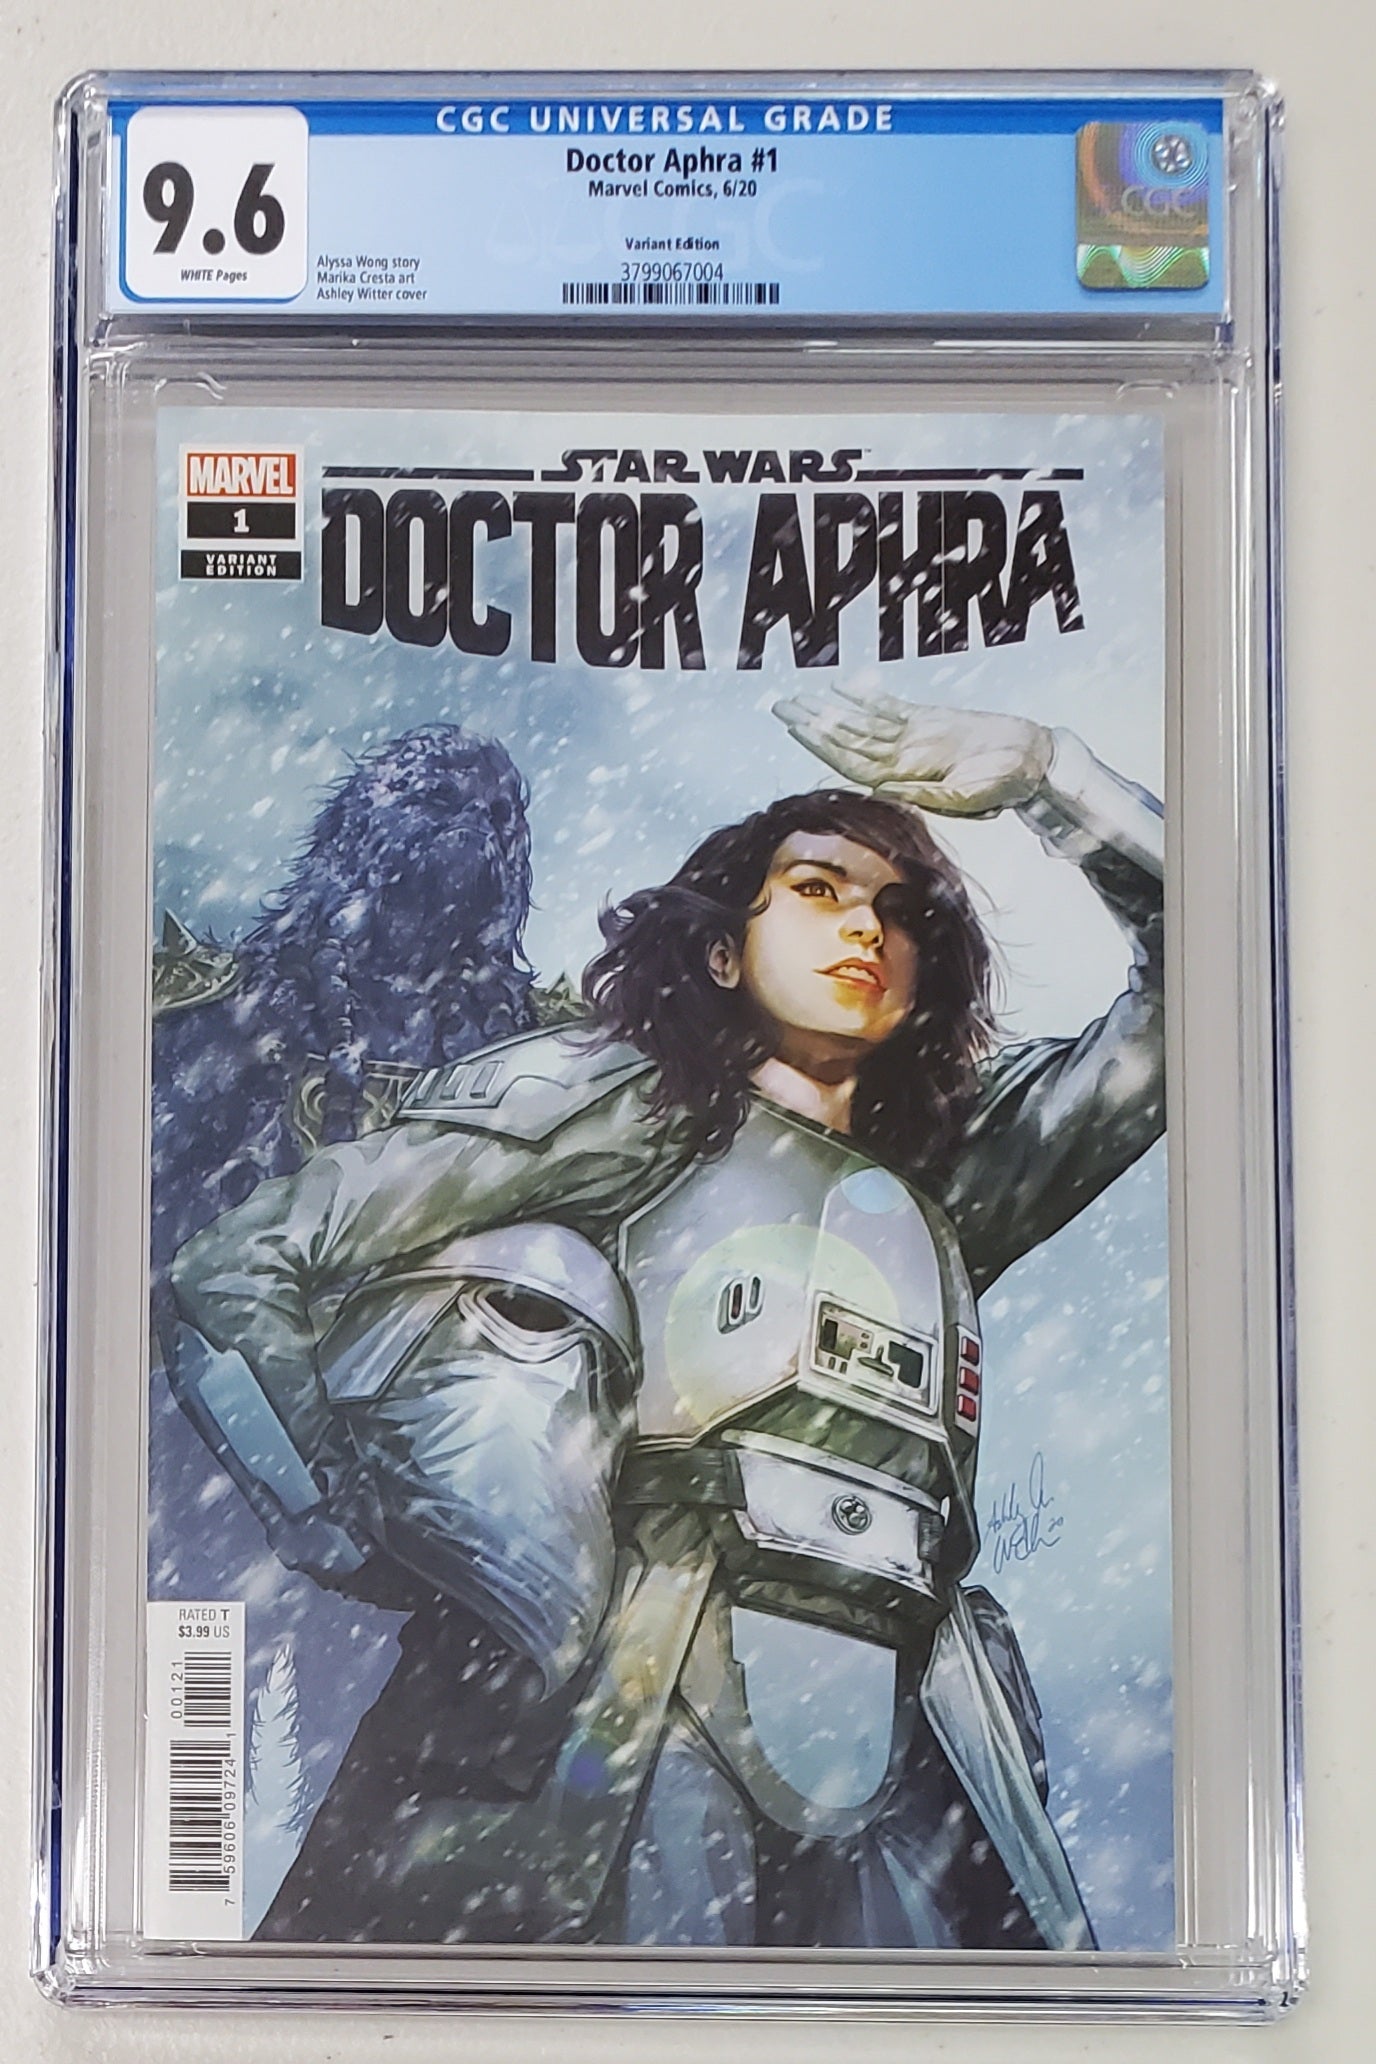 9.6 CGC DOCTOR APHRA #1 STAR WARS 1:25 WITTER VARIANT [3799067004]